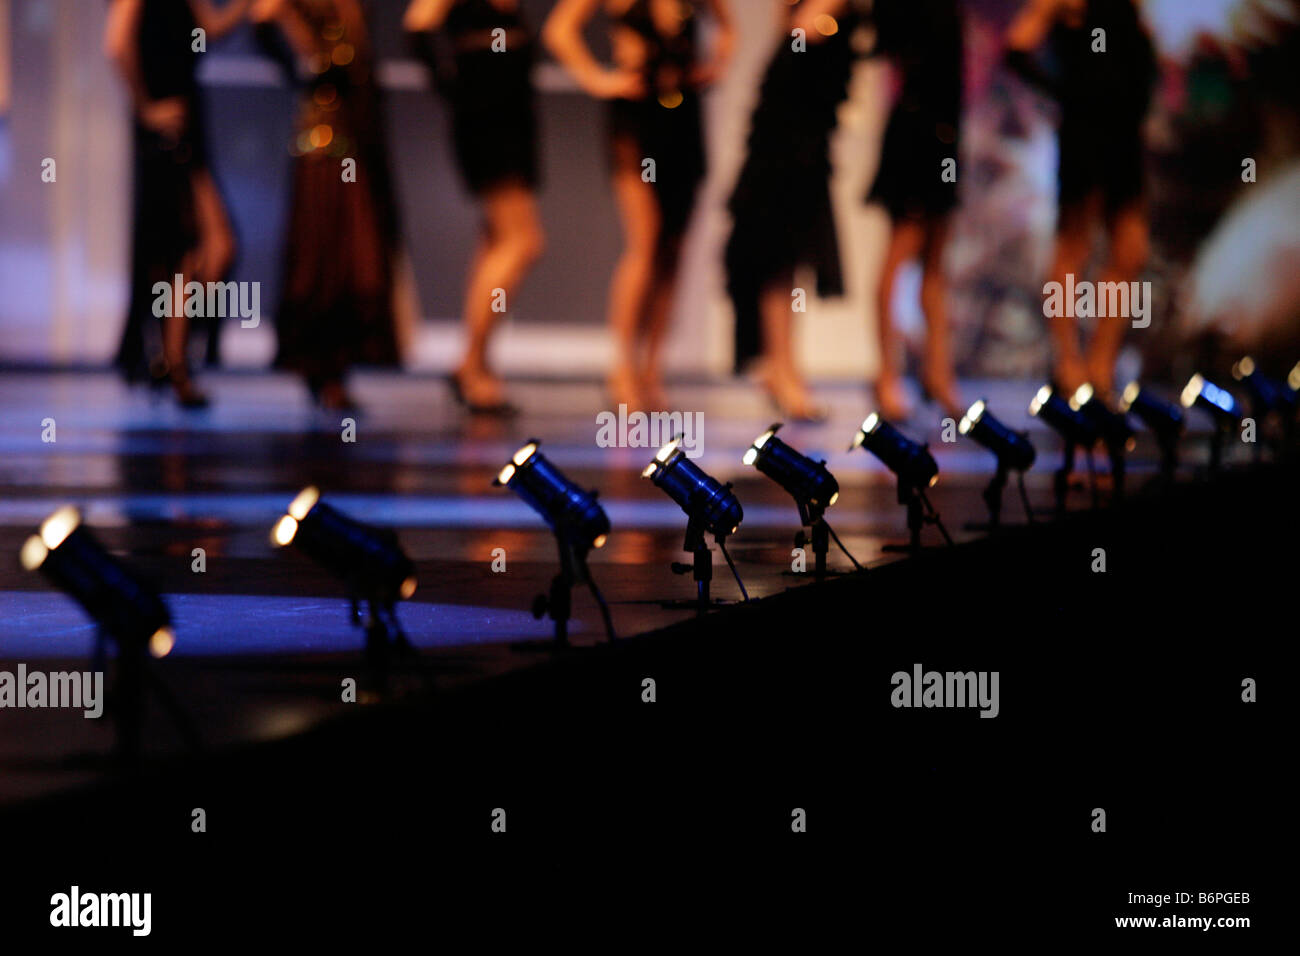 Footlights at the side of a fashion catwalk in the UK Stock Photo